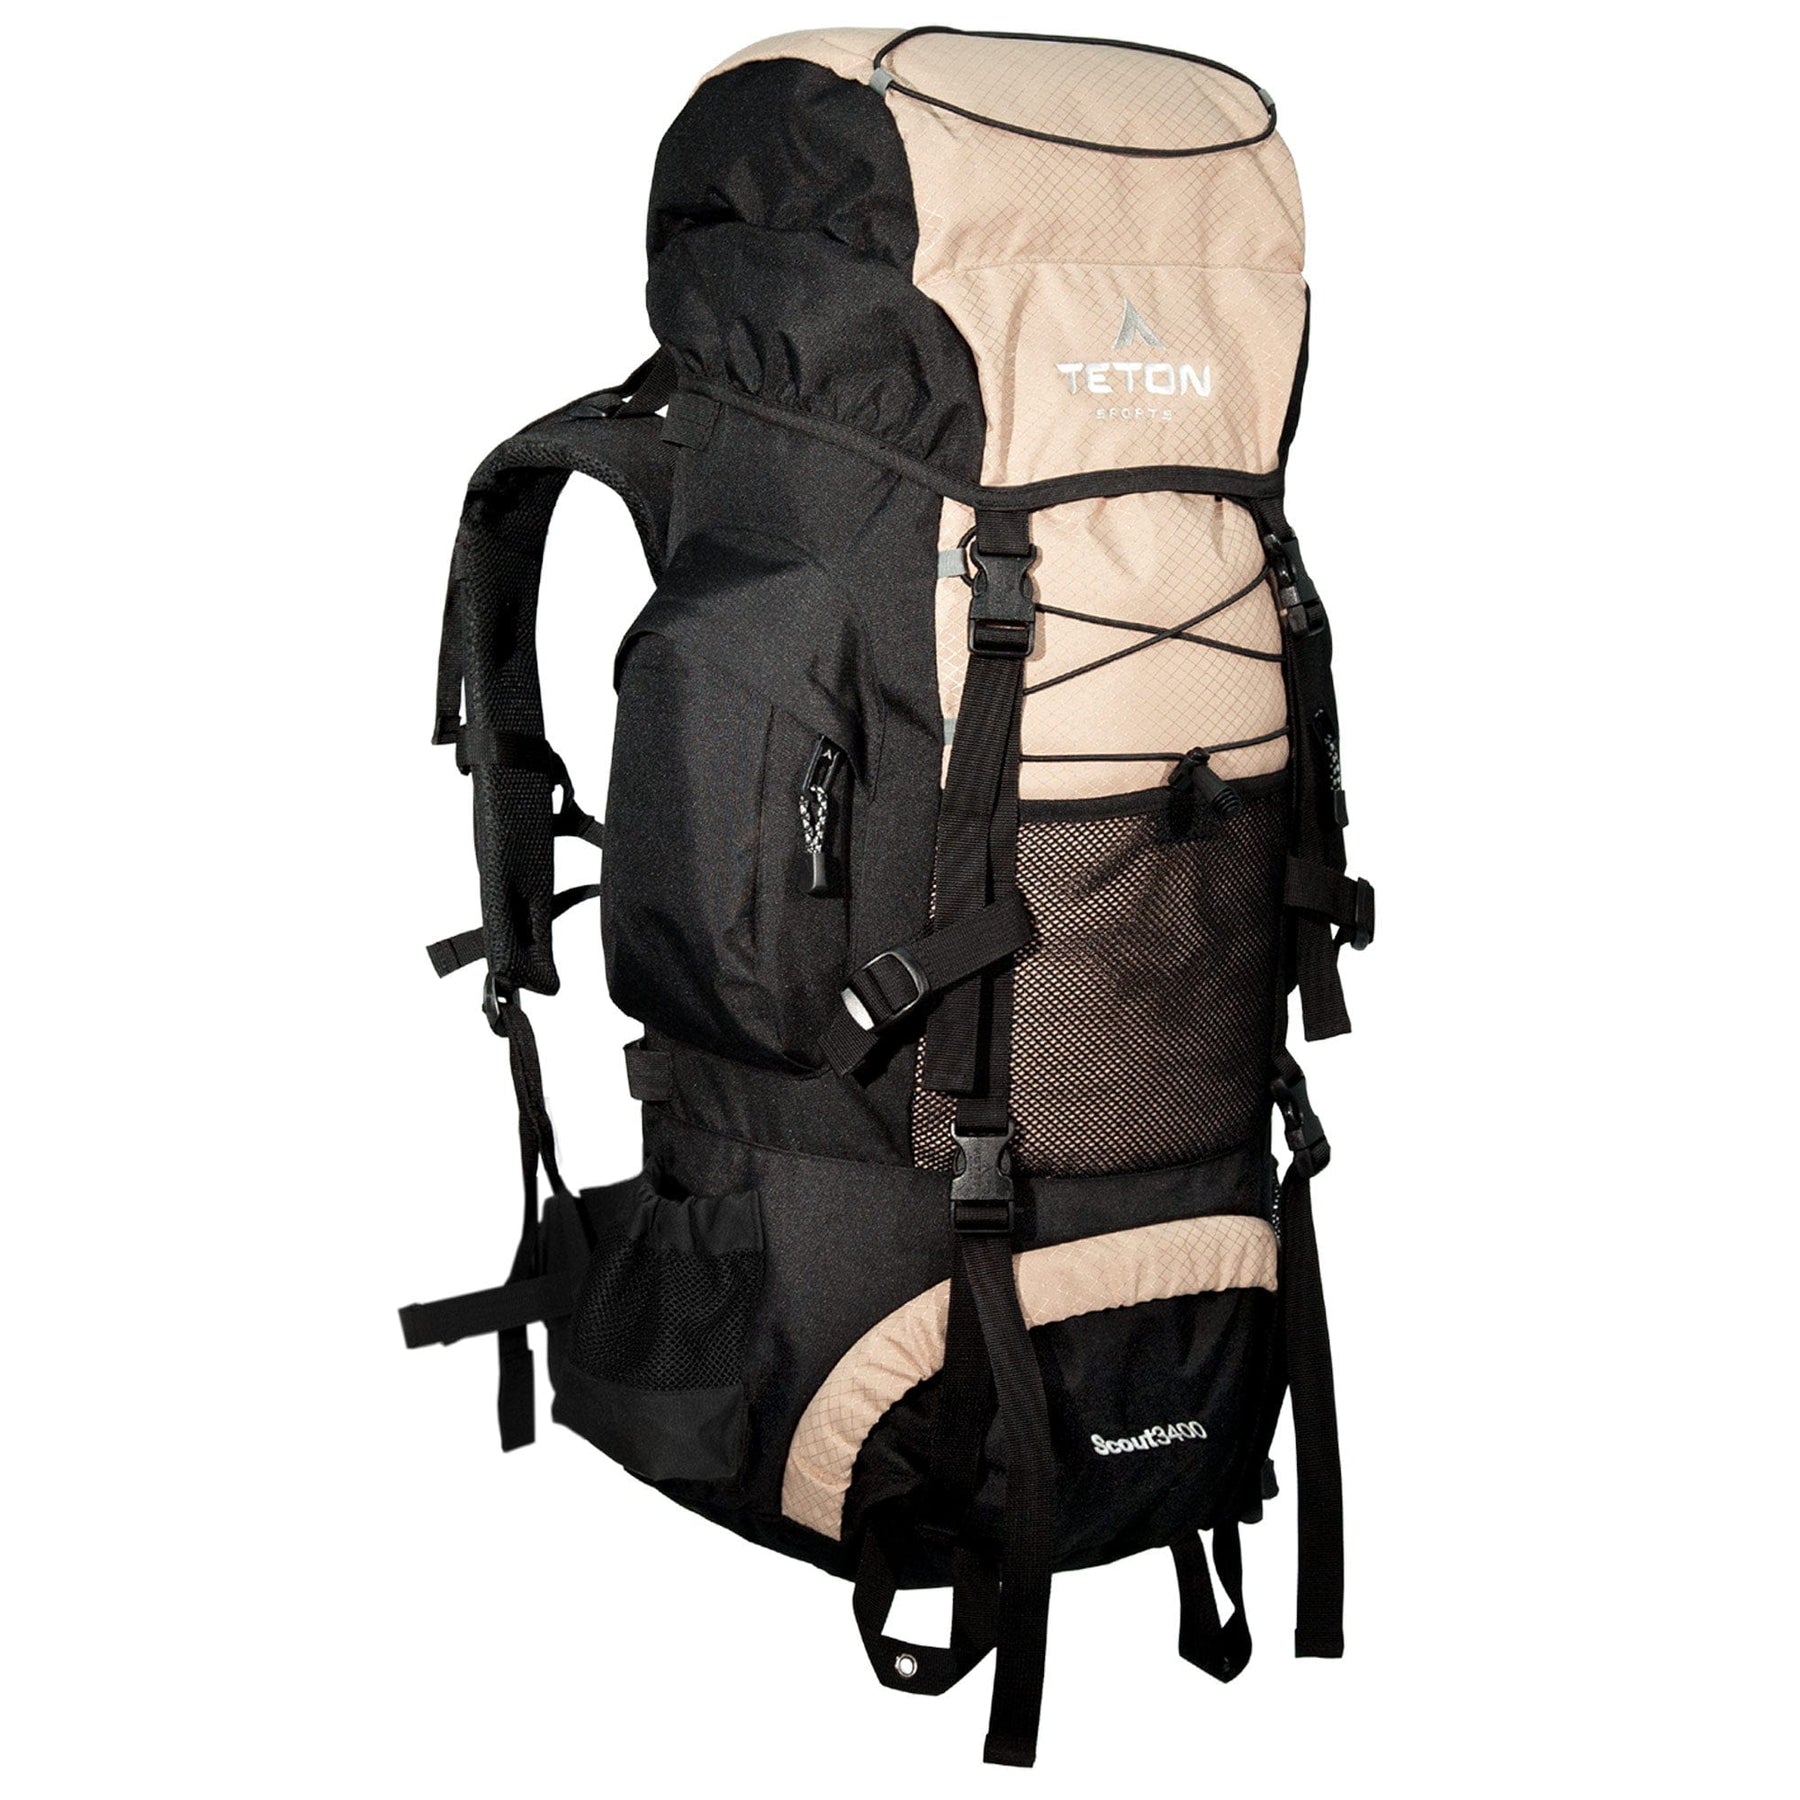 Scout 3400 Backpack